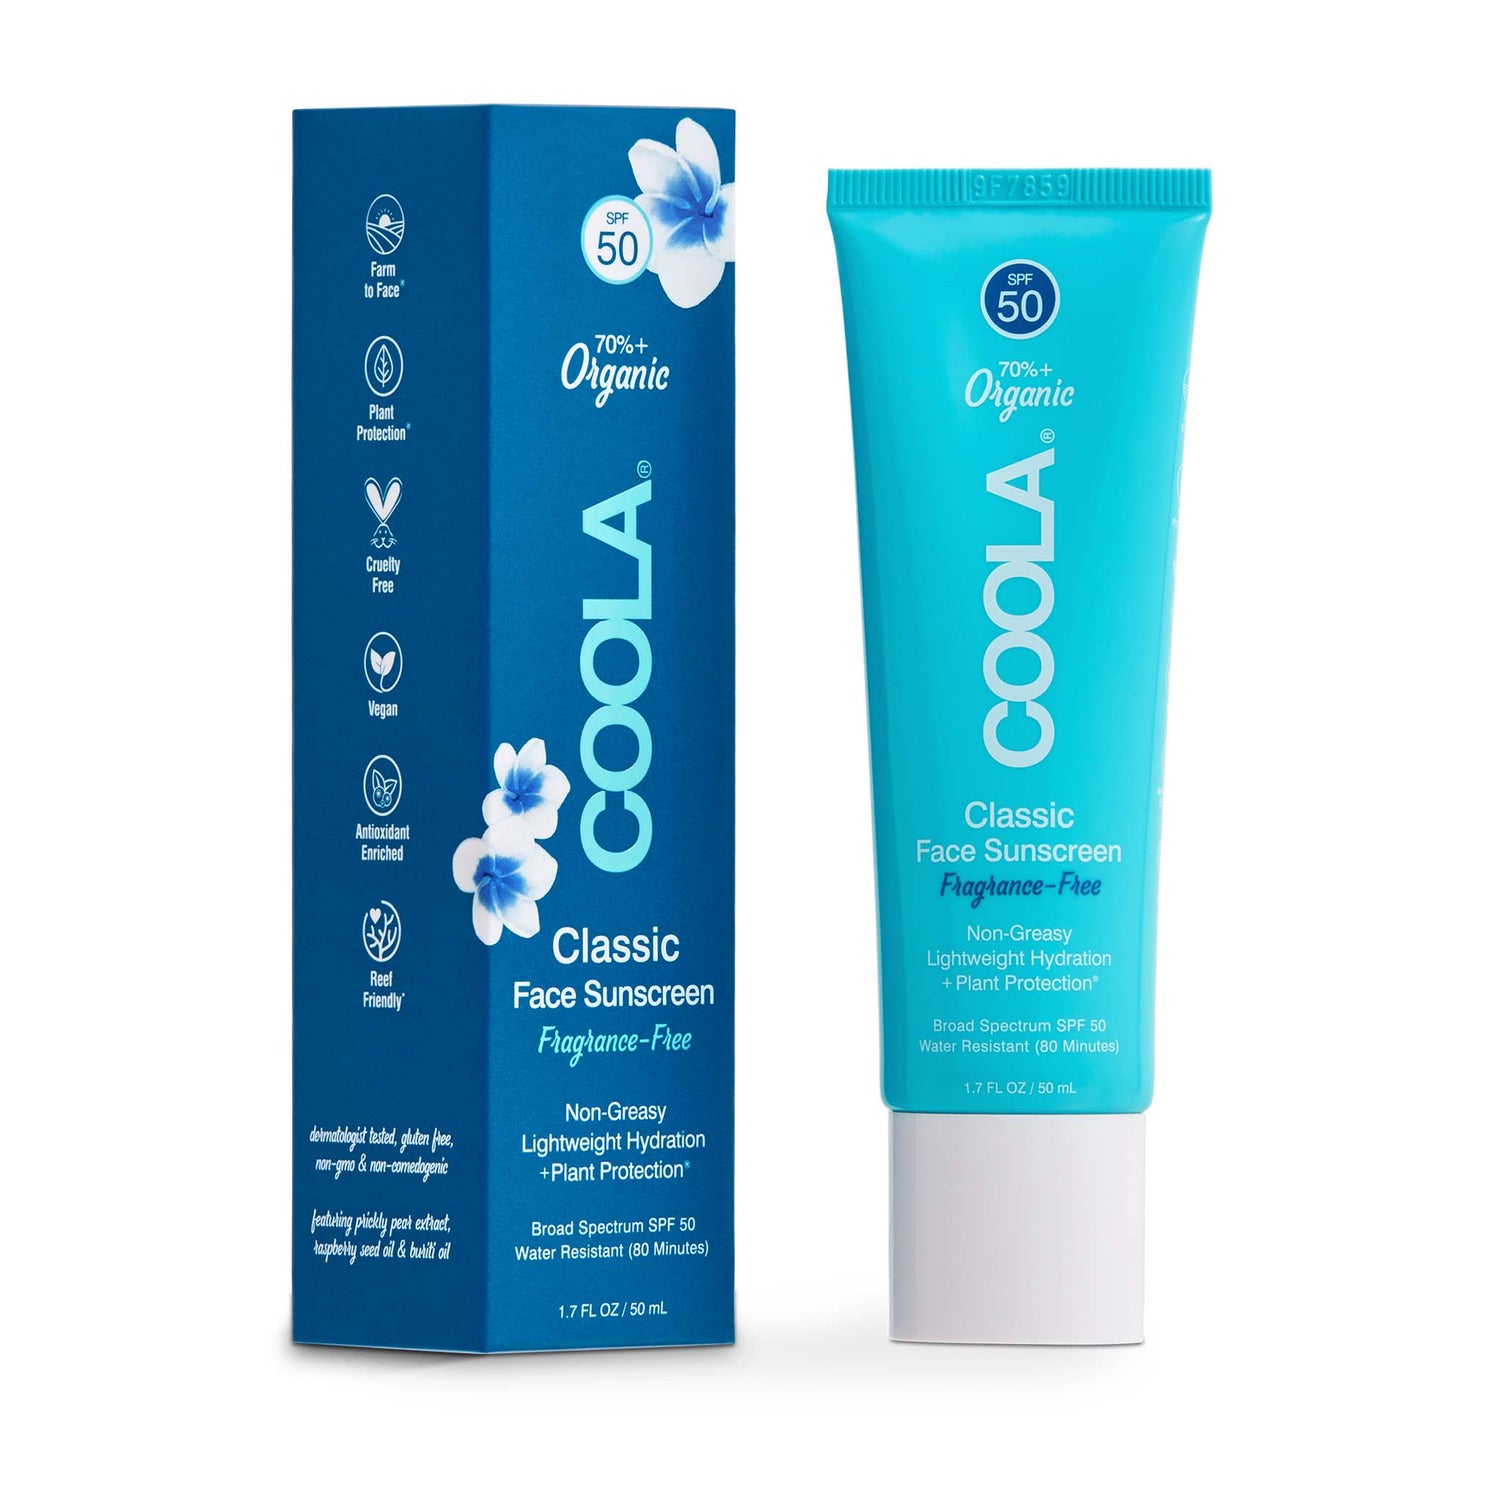 Coola face sunscreen spf 50 fragrance free is lightweight, non-greasy and is a great for daily use. 